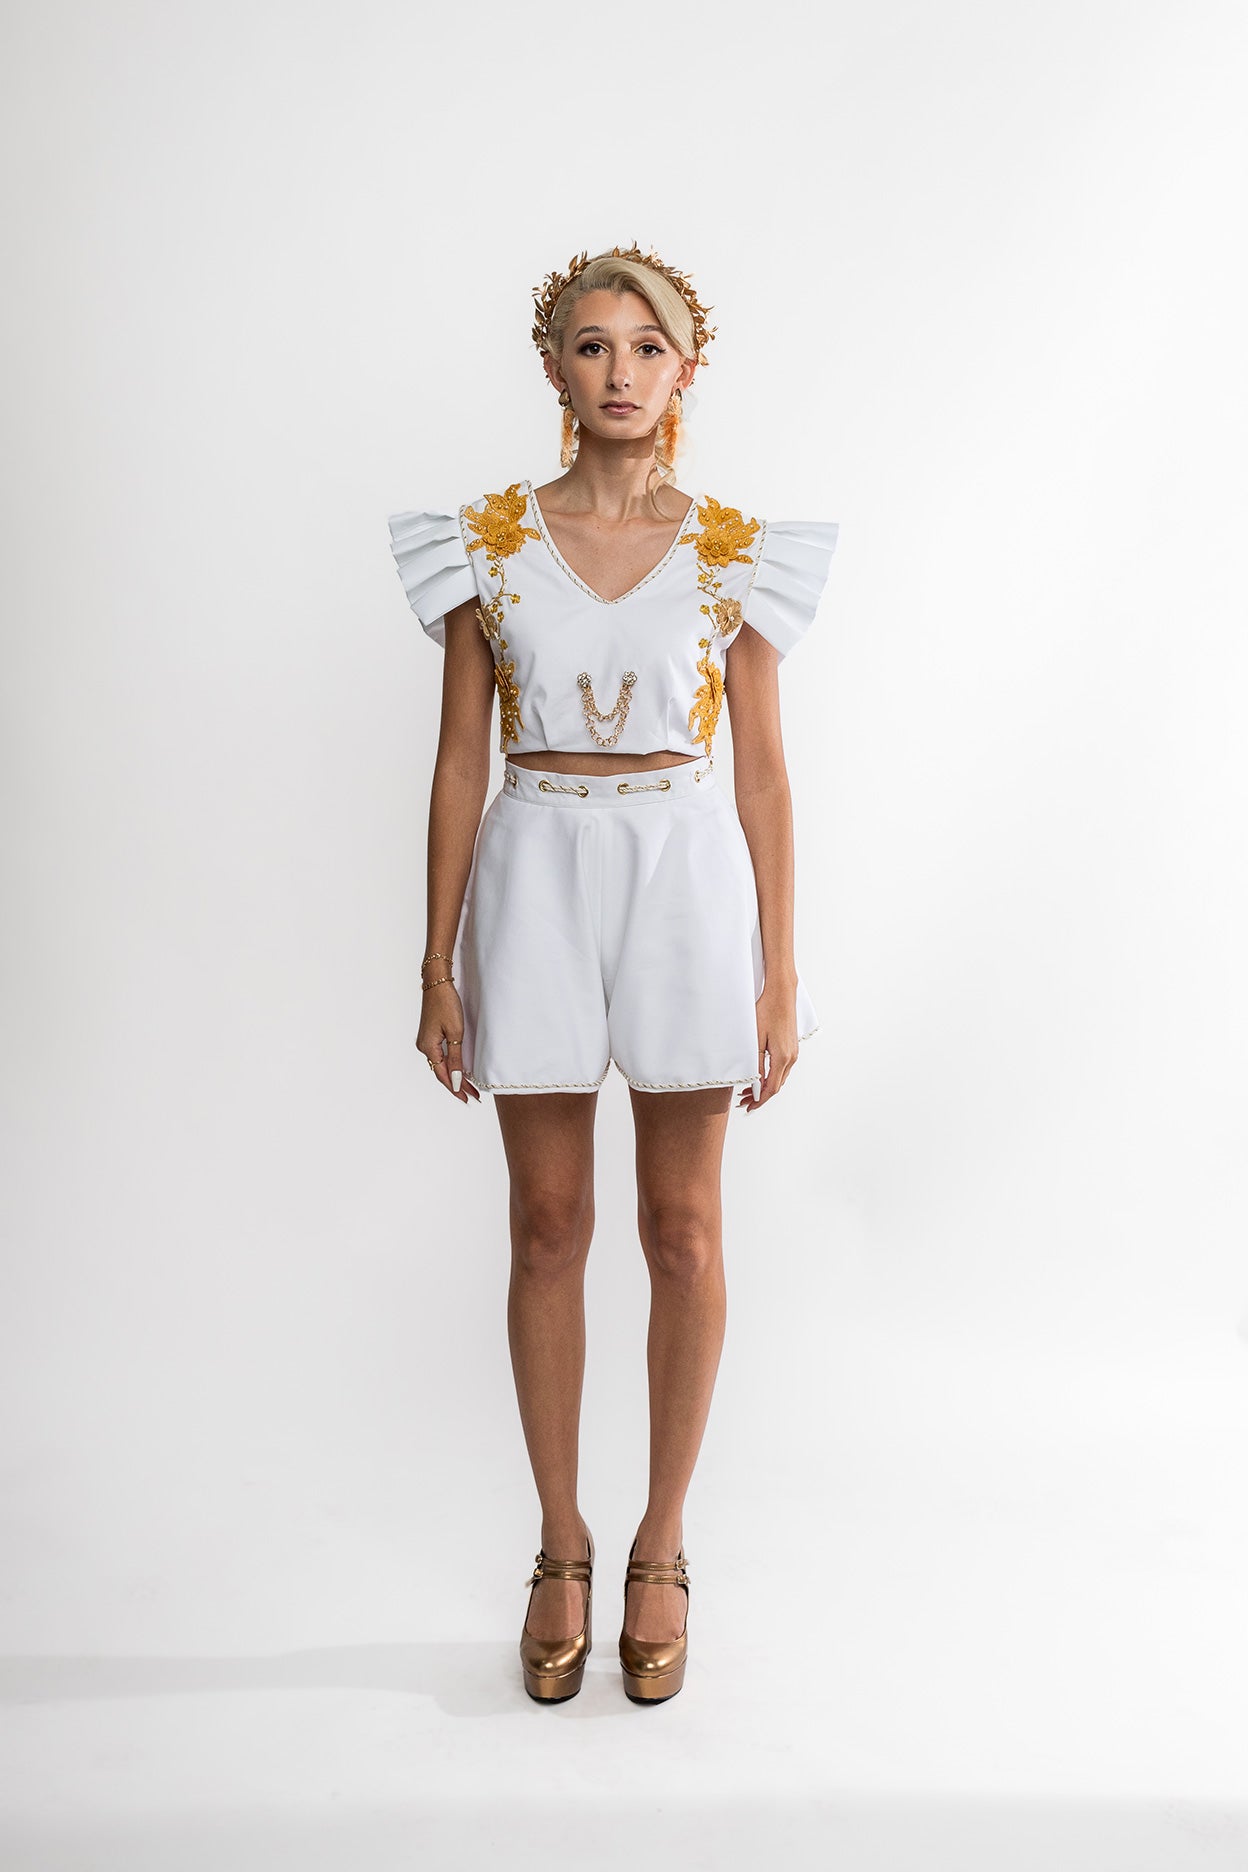 The Dainty Julia Top and Short Skirt Floret